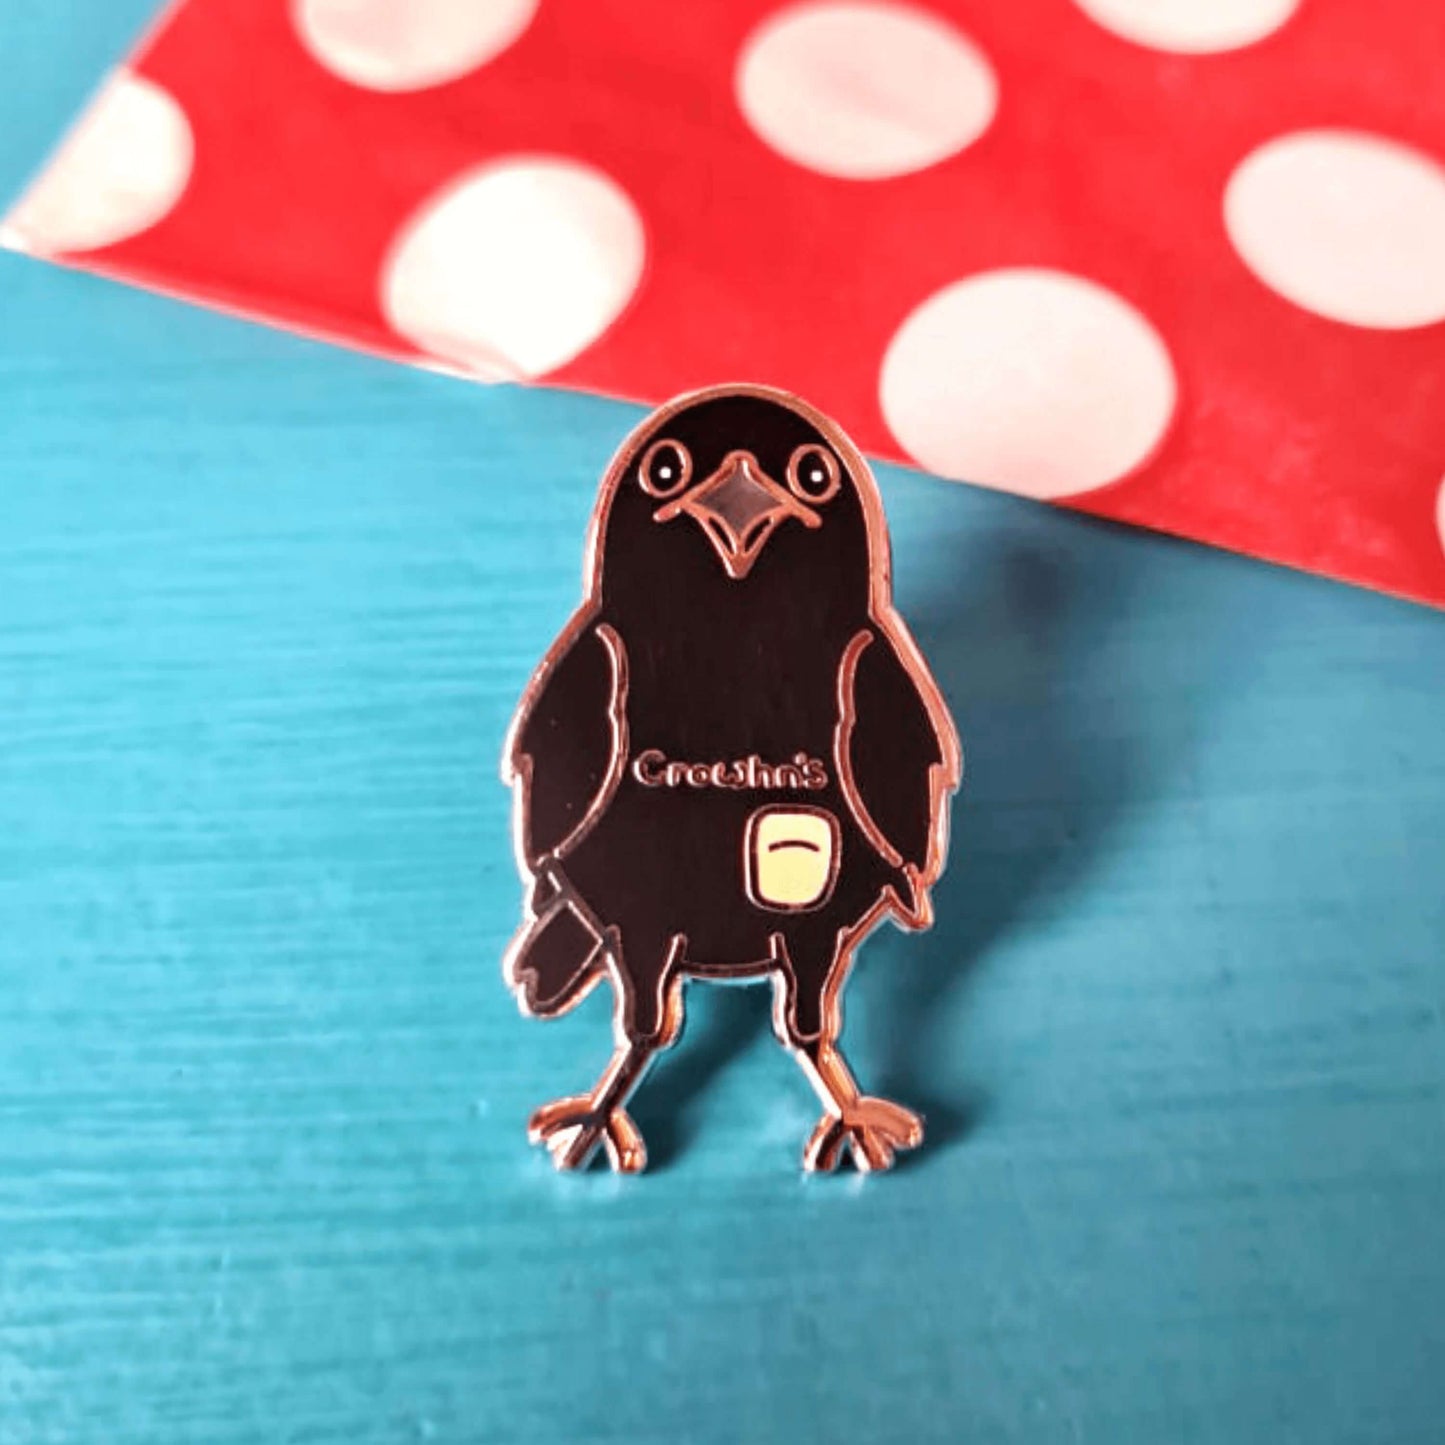 The Crowhn's Disease Enamel Pin - Crohn's Disease on a red and blue background. The black crow shape pin has a white stoma bag fitted and the text reading 'chrowhn's' across its chest. The design is raising awareness for crohn's disease.